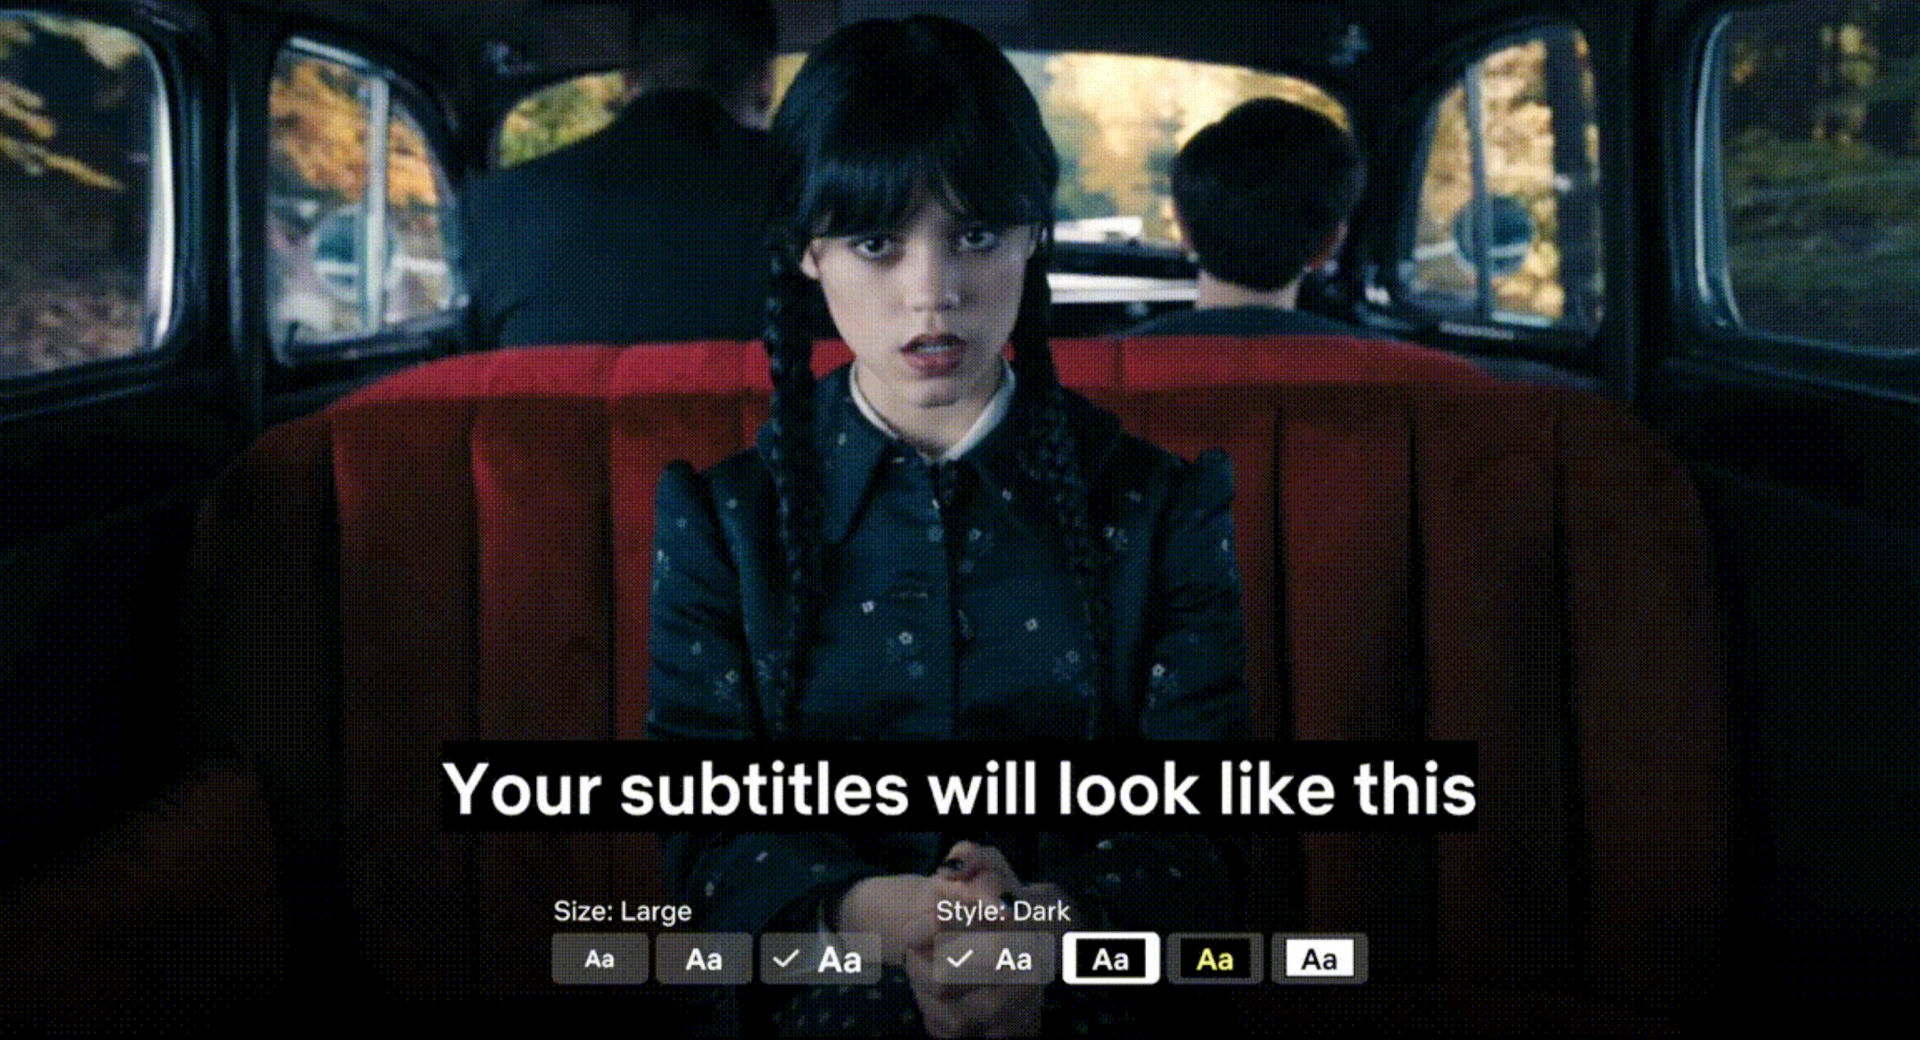 A Netflix show (Wednesday) with subtitles displayed with numerous options to change the size and style of the subtitles